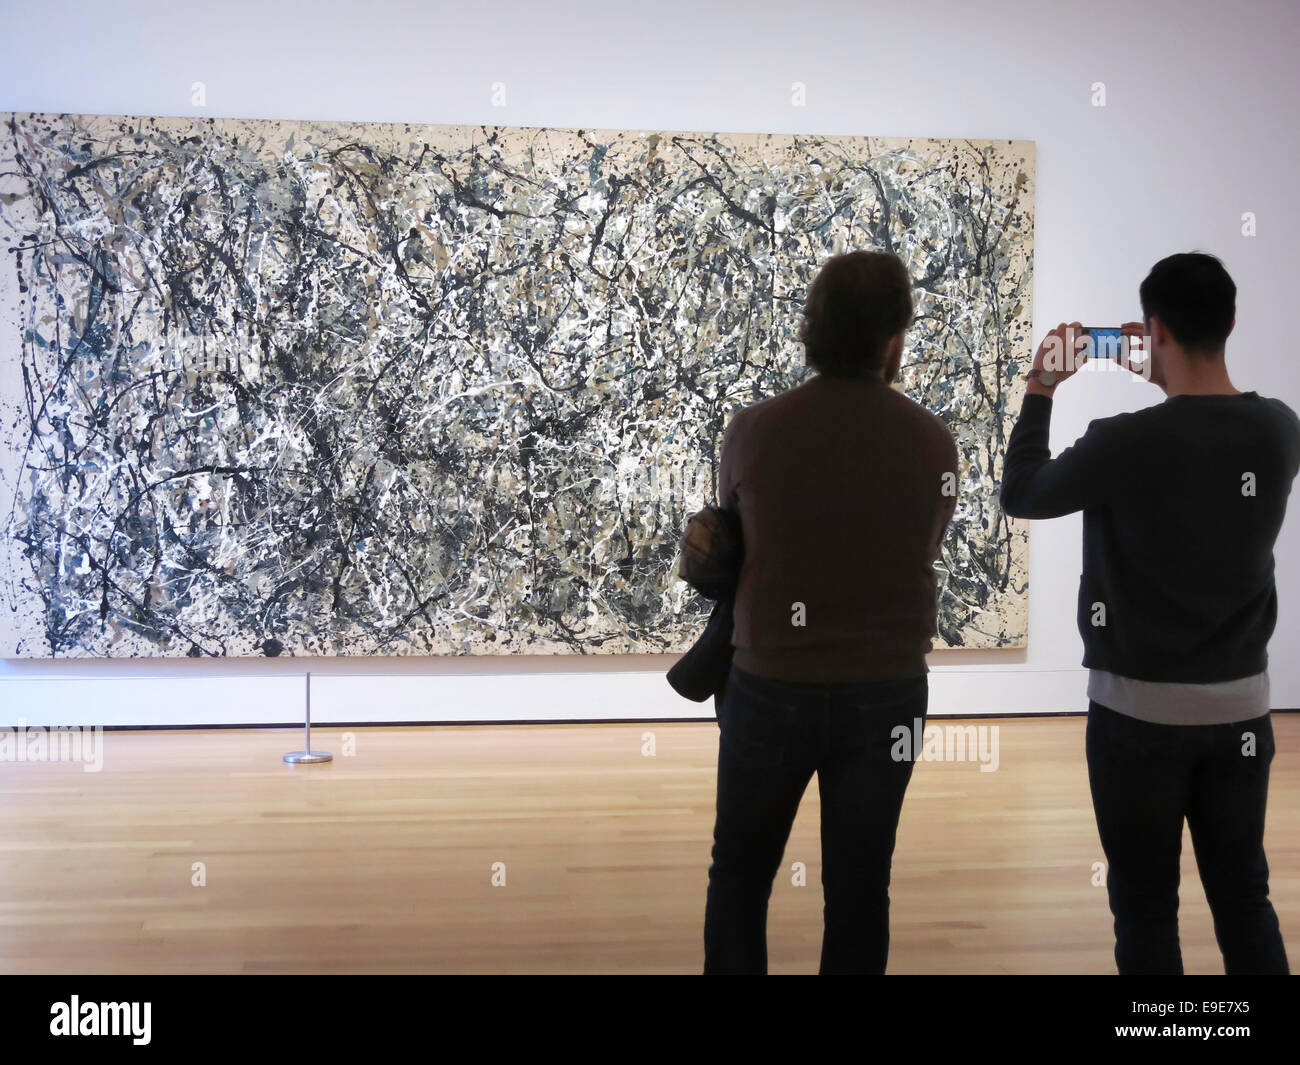 Visitors Admiring and Taking Photos of a Jackson Pollock Drip Painting, Museum of Modern Art, NYC Stock Photo